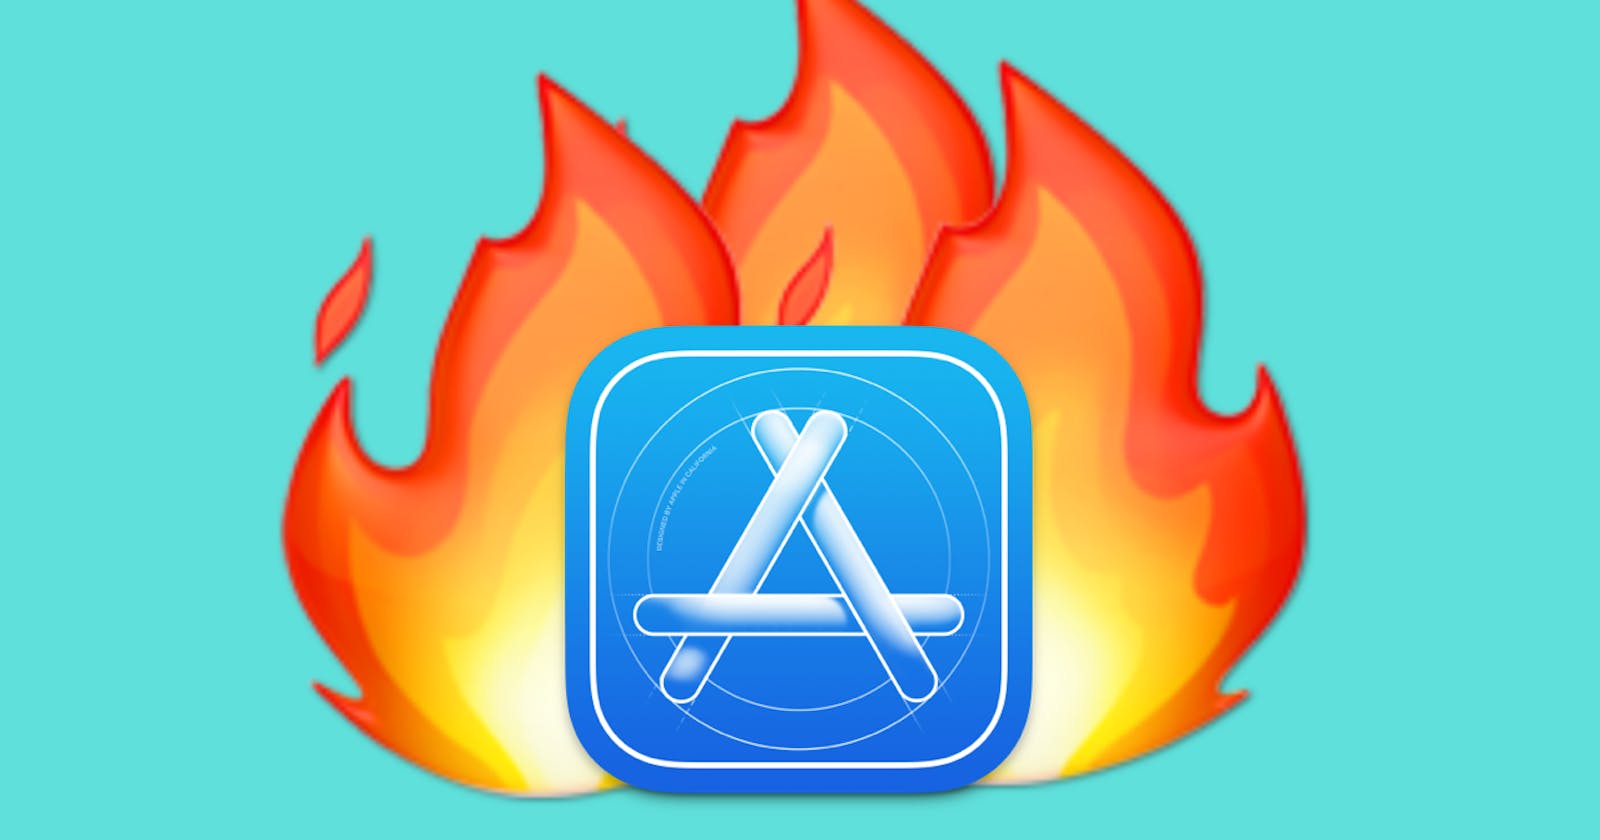 Xcode Extensions, Code Signing, and TestFlight woes